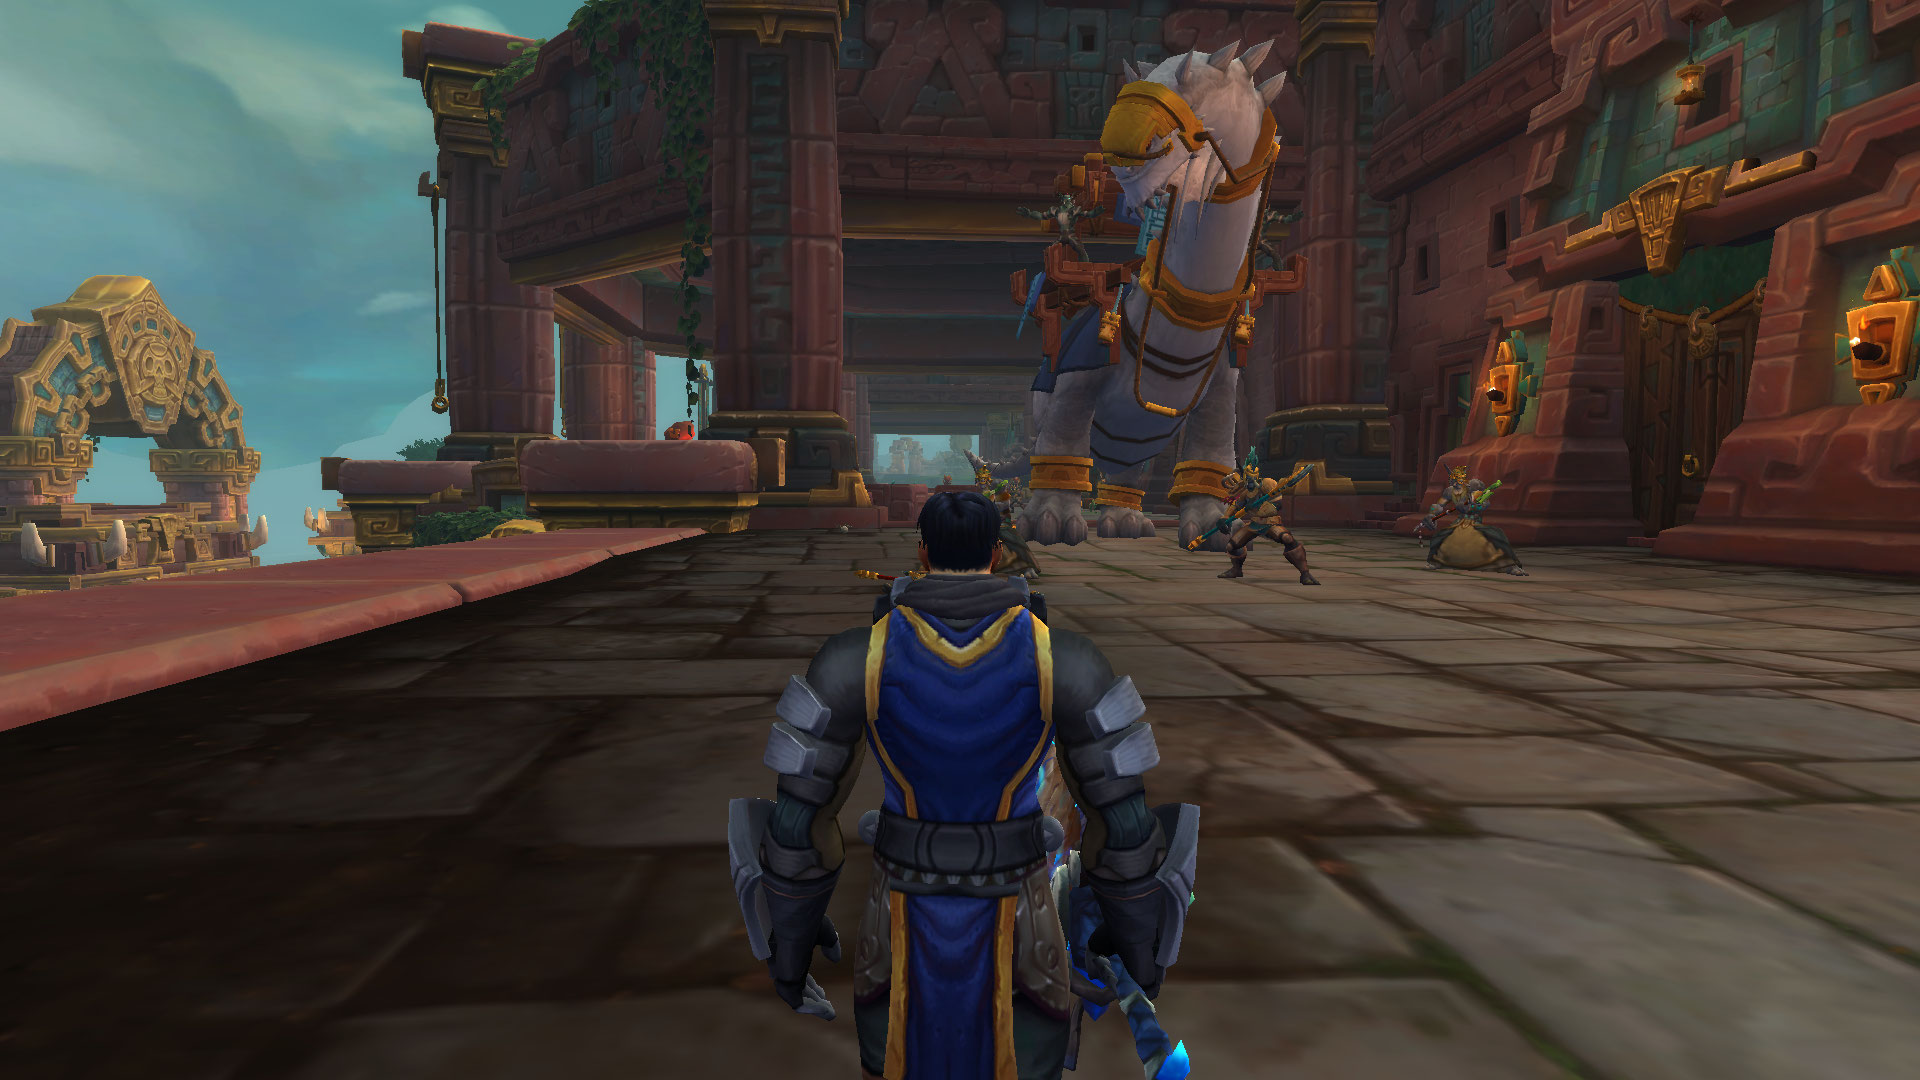 Raiding With A Purpose: How To Set Goals For Your World Of Warcraft Raids